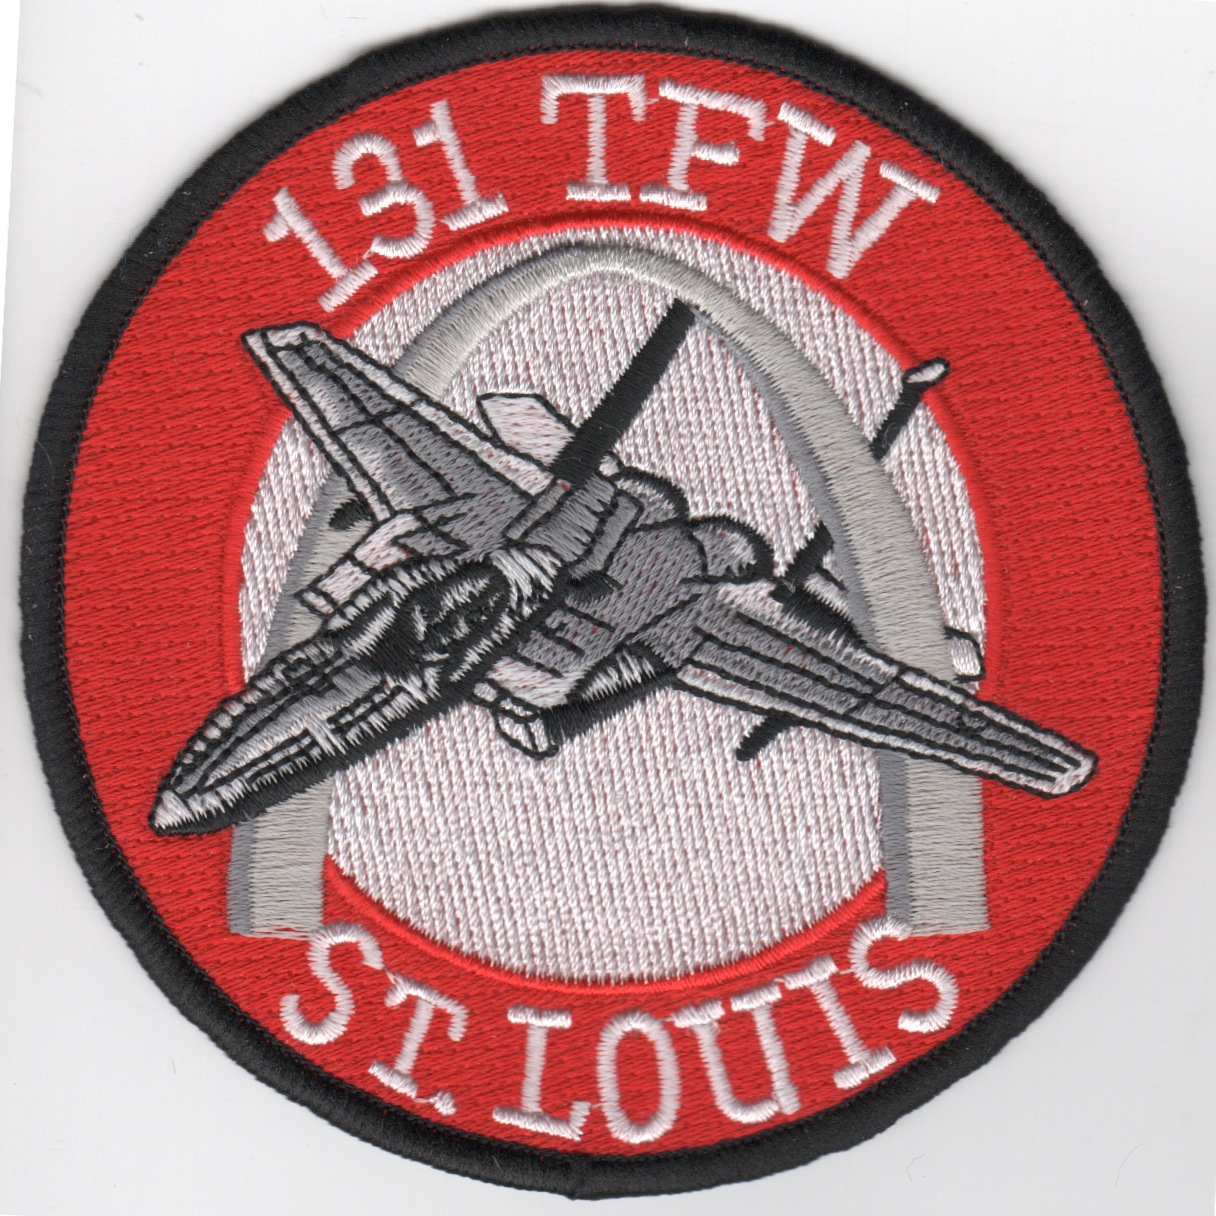 131TFW 'St. Louis' Patch (Gray F-15)